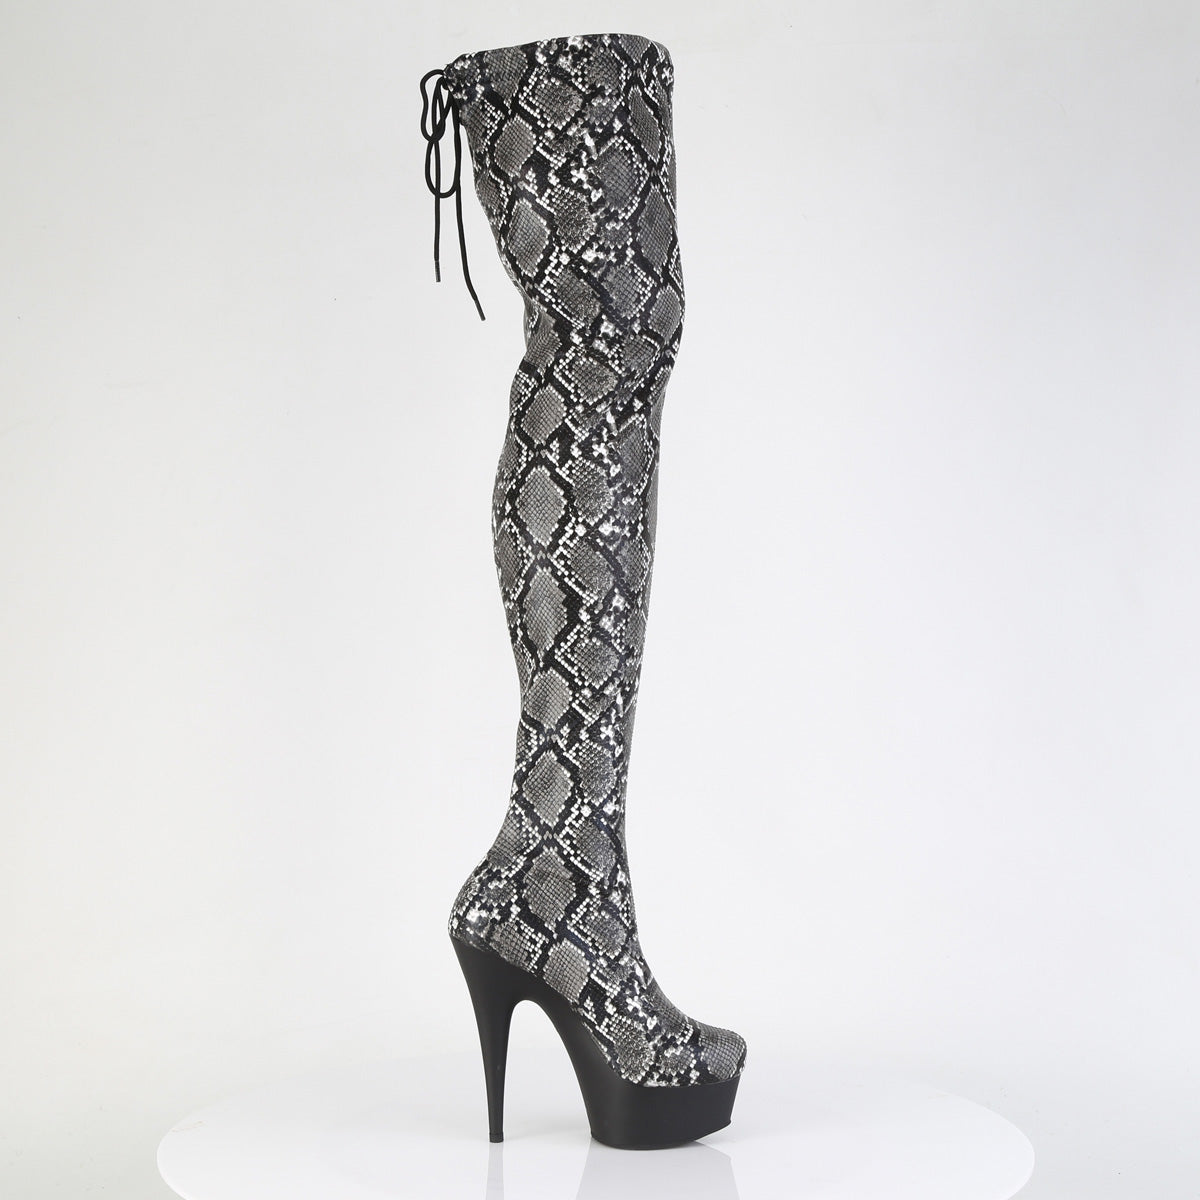 DELIGHT-3008SP-BT Snake Stretch Print Pull-On Thigh Boot Black & Grey Multi view 2